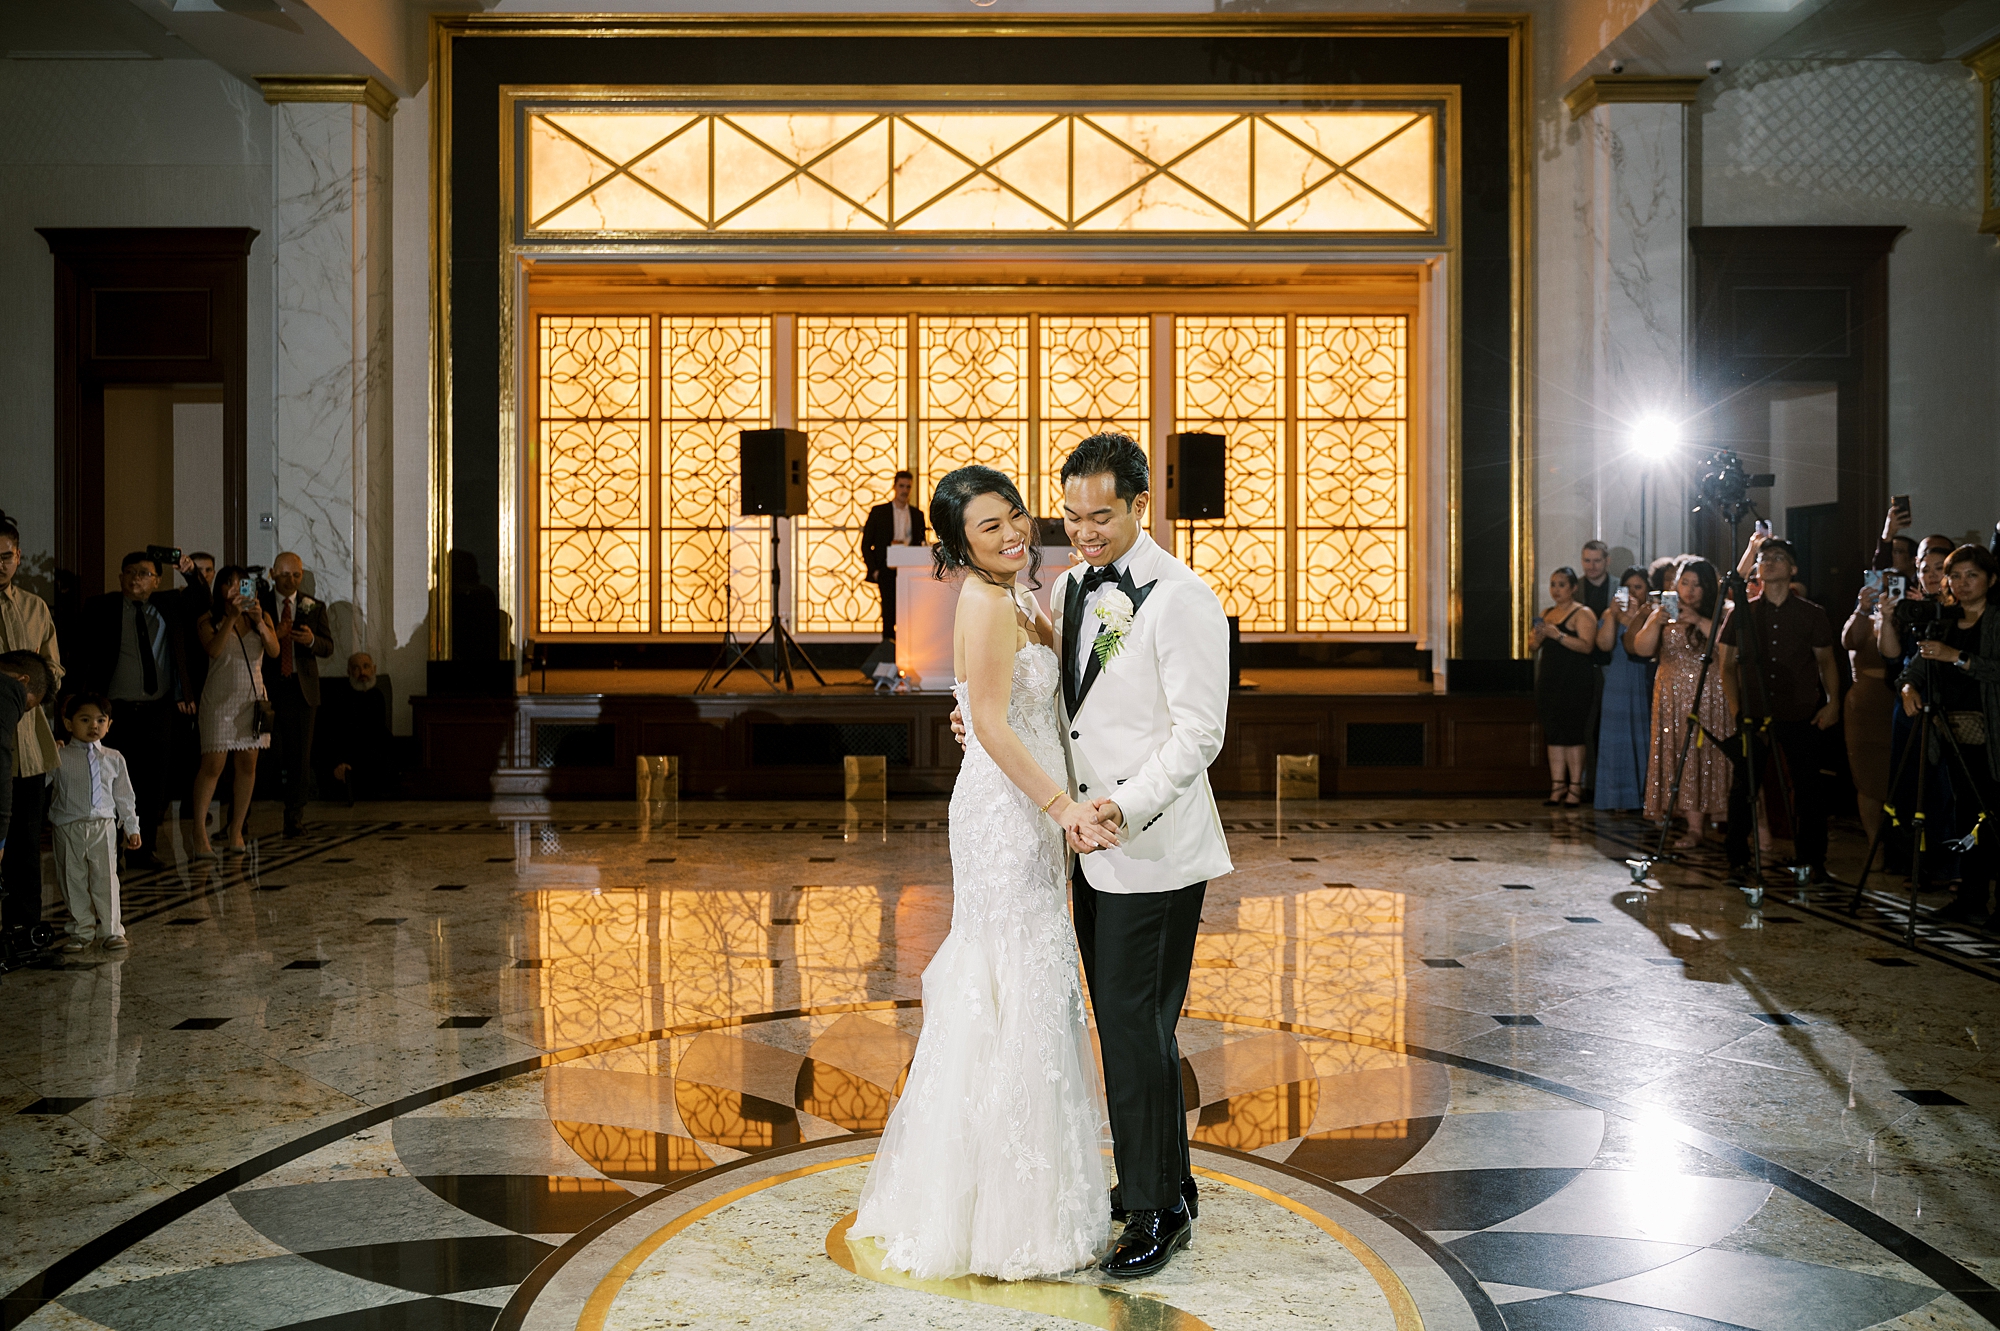 newlyweds have first dance during wedding reception in ballroom